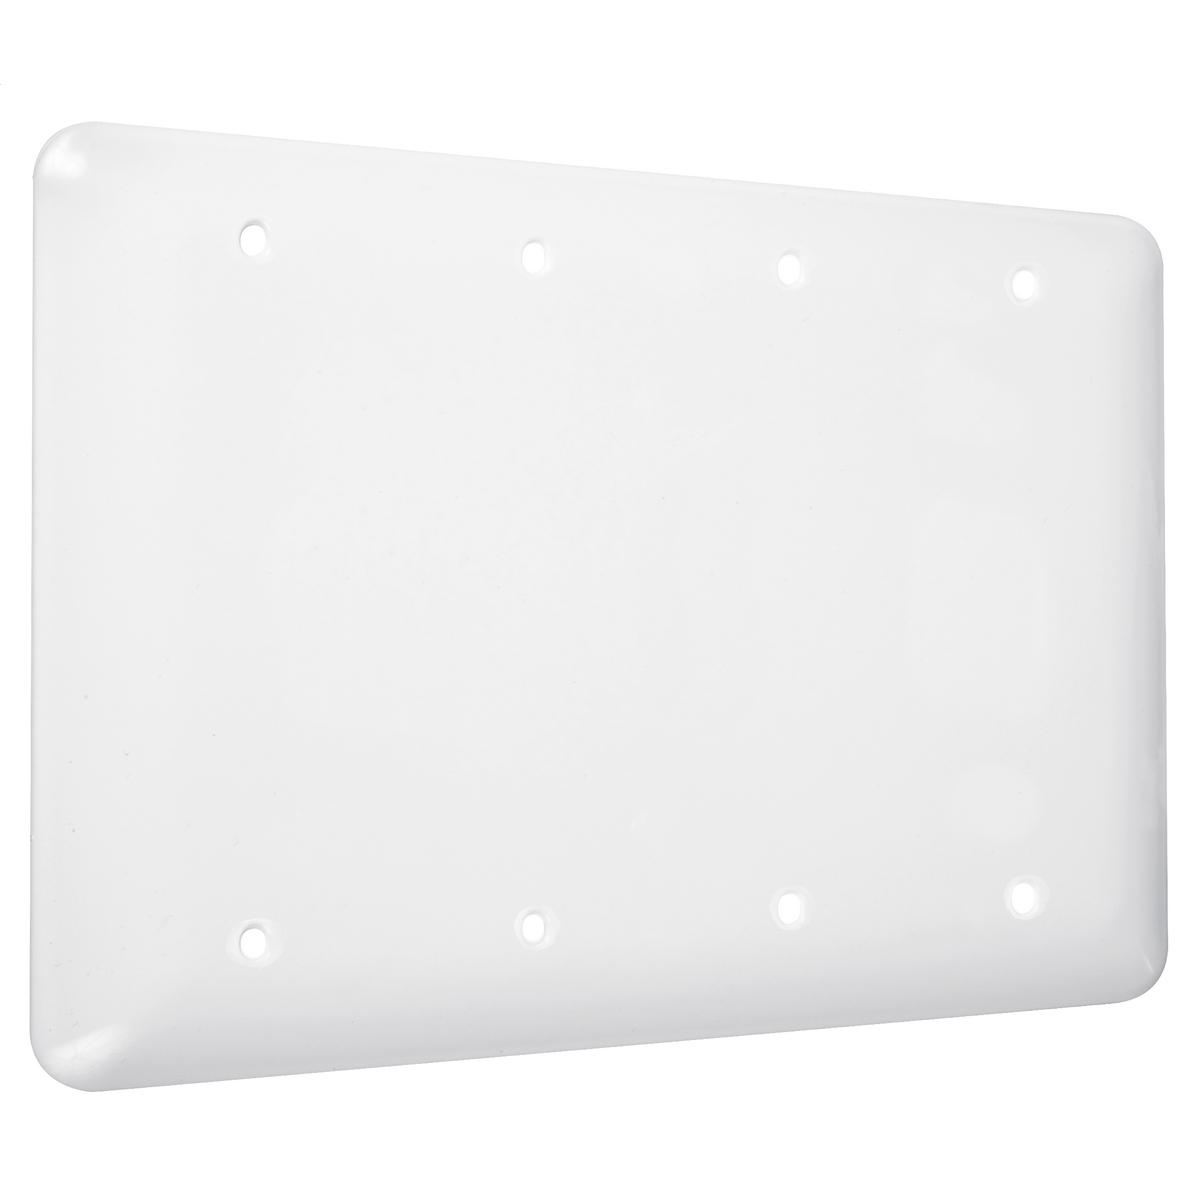 Hubbell WRW-BBBB 4-Gang Metal Wallplate, Maxi, 4-Blank, White Smooth  ; Easily primed and painted to match or complement walls. ; Won't bow, crack or distort during installation. ; Premium North American powder coat. ; Includes screw(s) in matching finish.